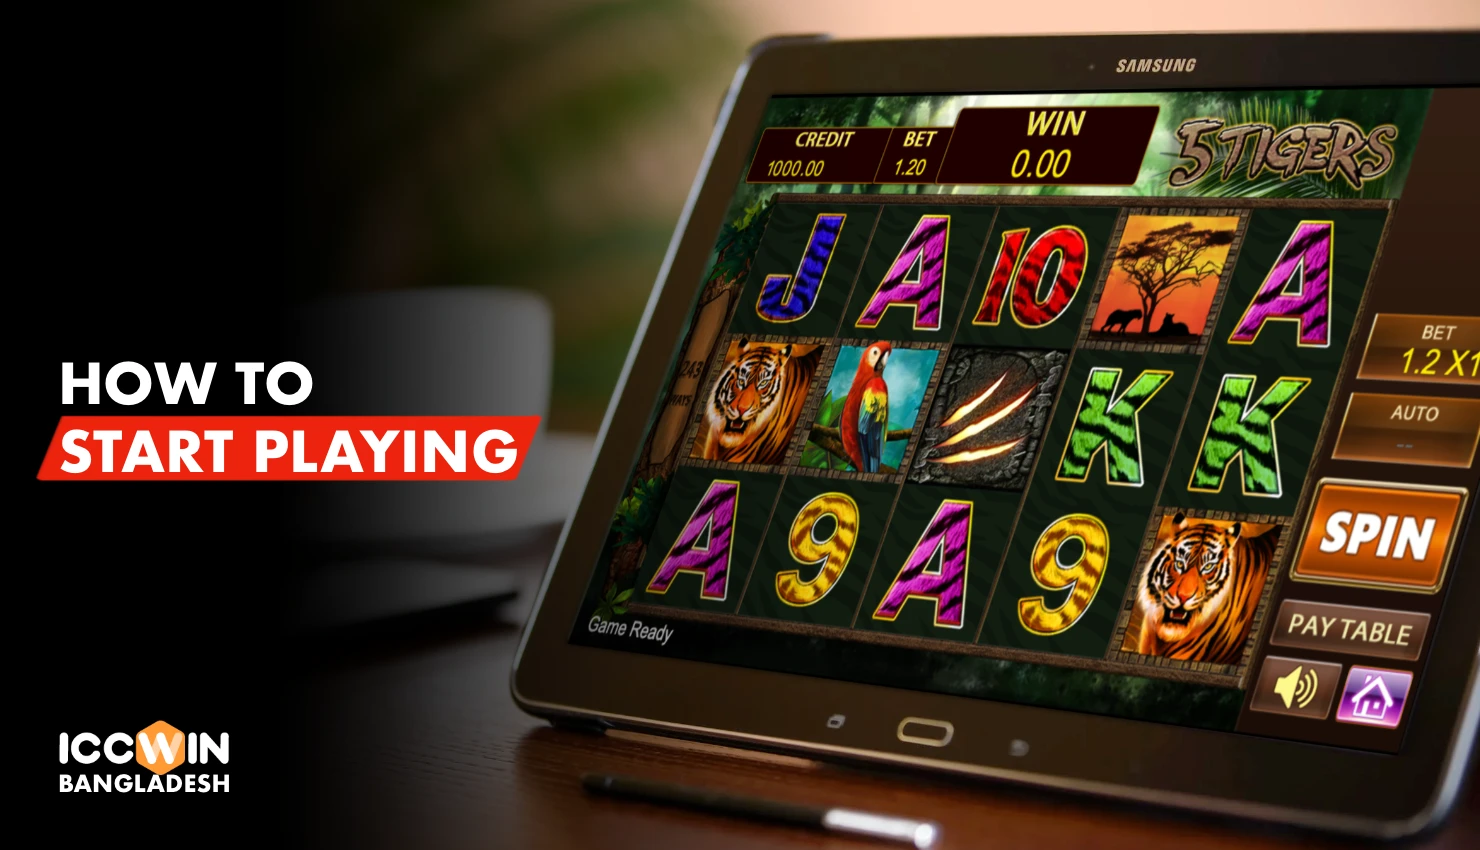 To start playing at Iccwin Casino, you need to meet a few simple conditions